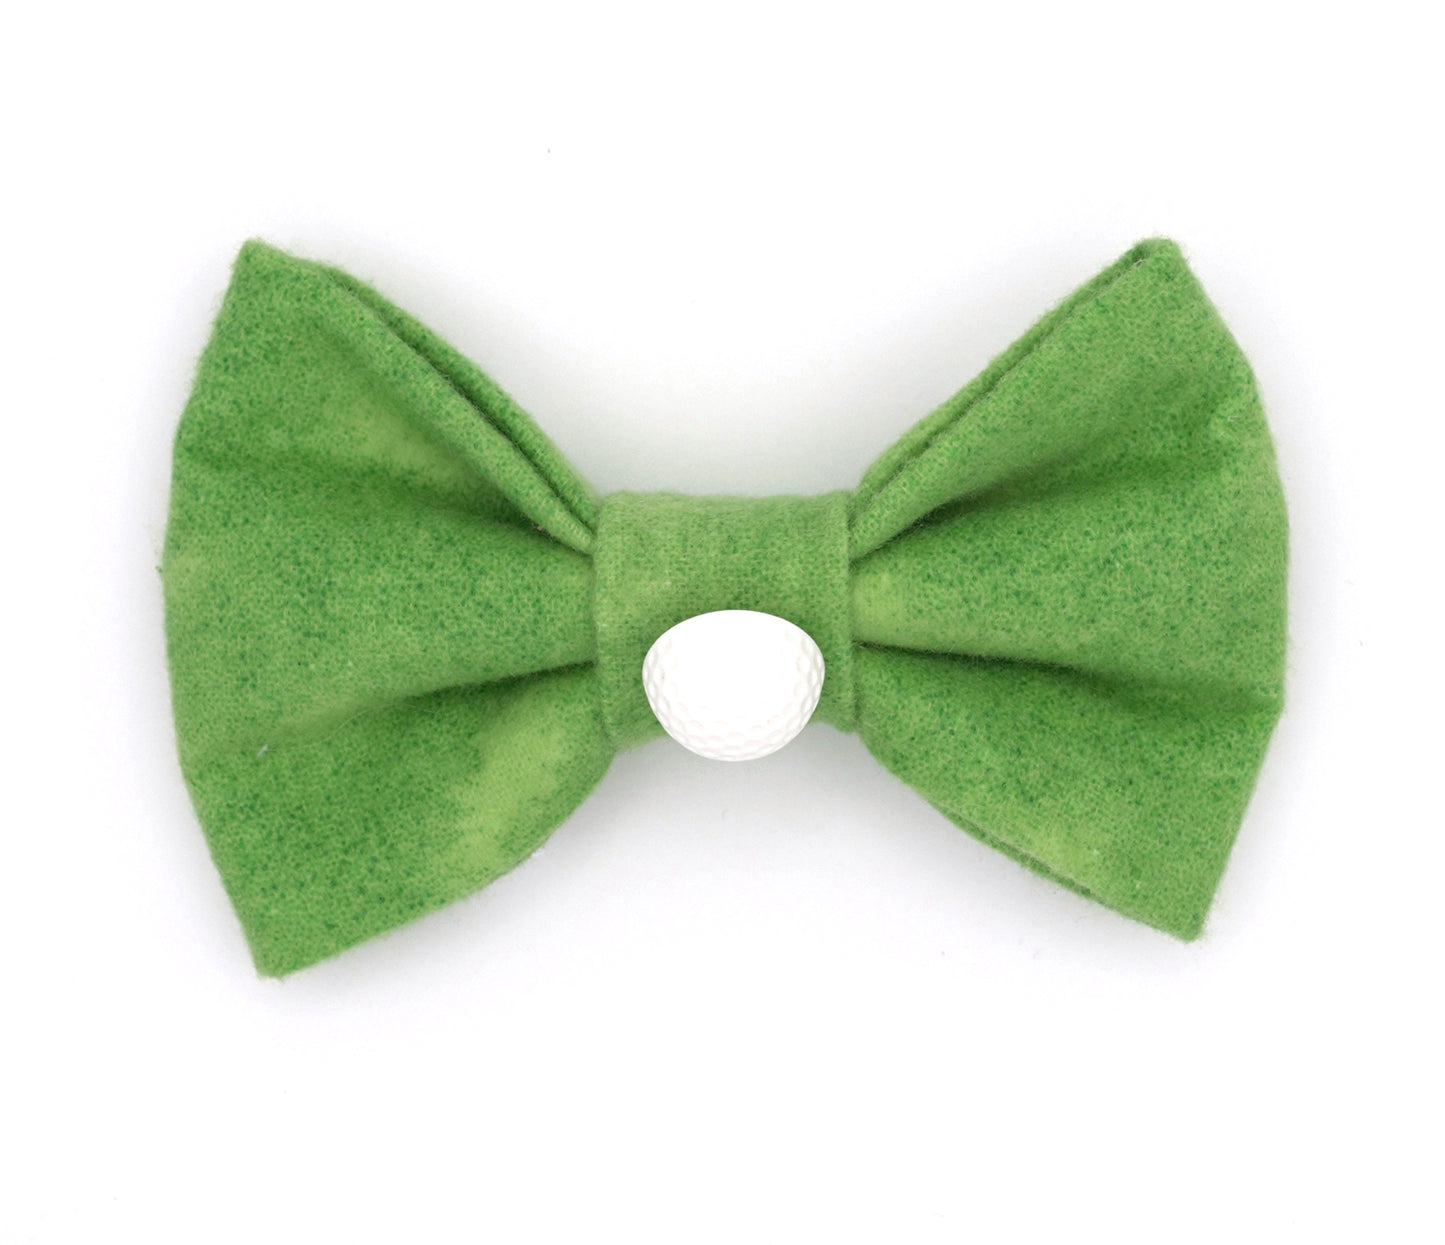 Handmade polyester bow tie for dogs (or other pets). Elastic straps on back with snaps make it easy to add to collar, harness, or leash. Bright green print that looks like a golf green with golf ball button in center of bow.